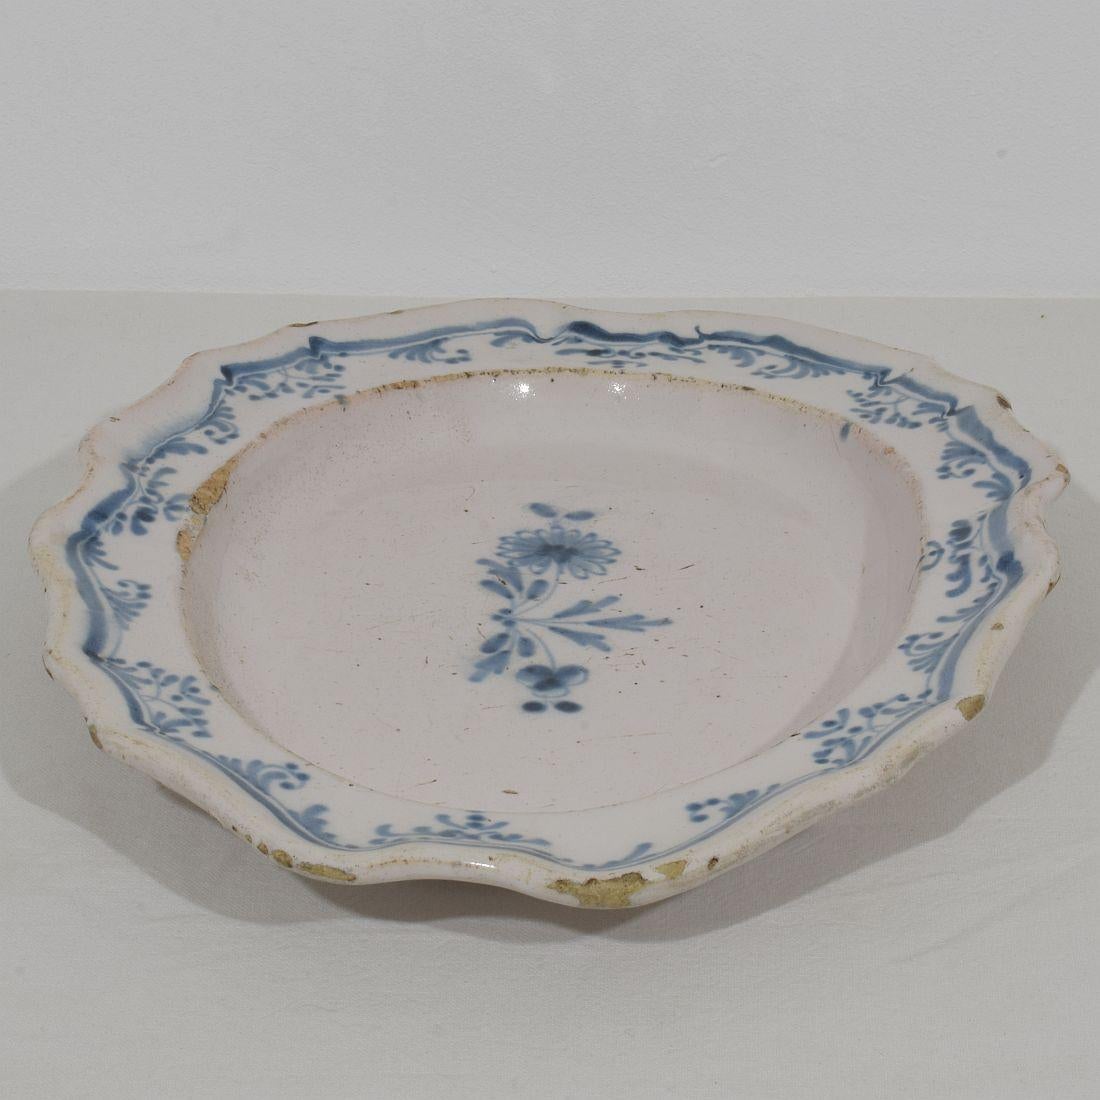 French, 18th Century Glazed Earthenware Rouen Platter For Sale 5